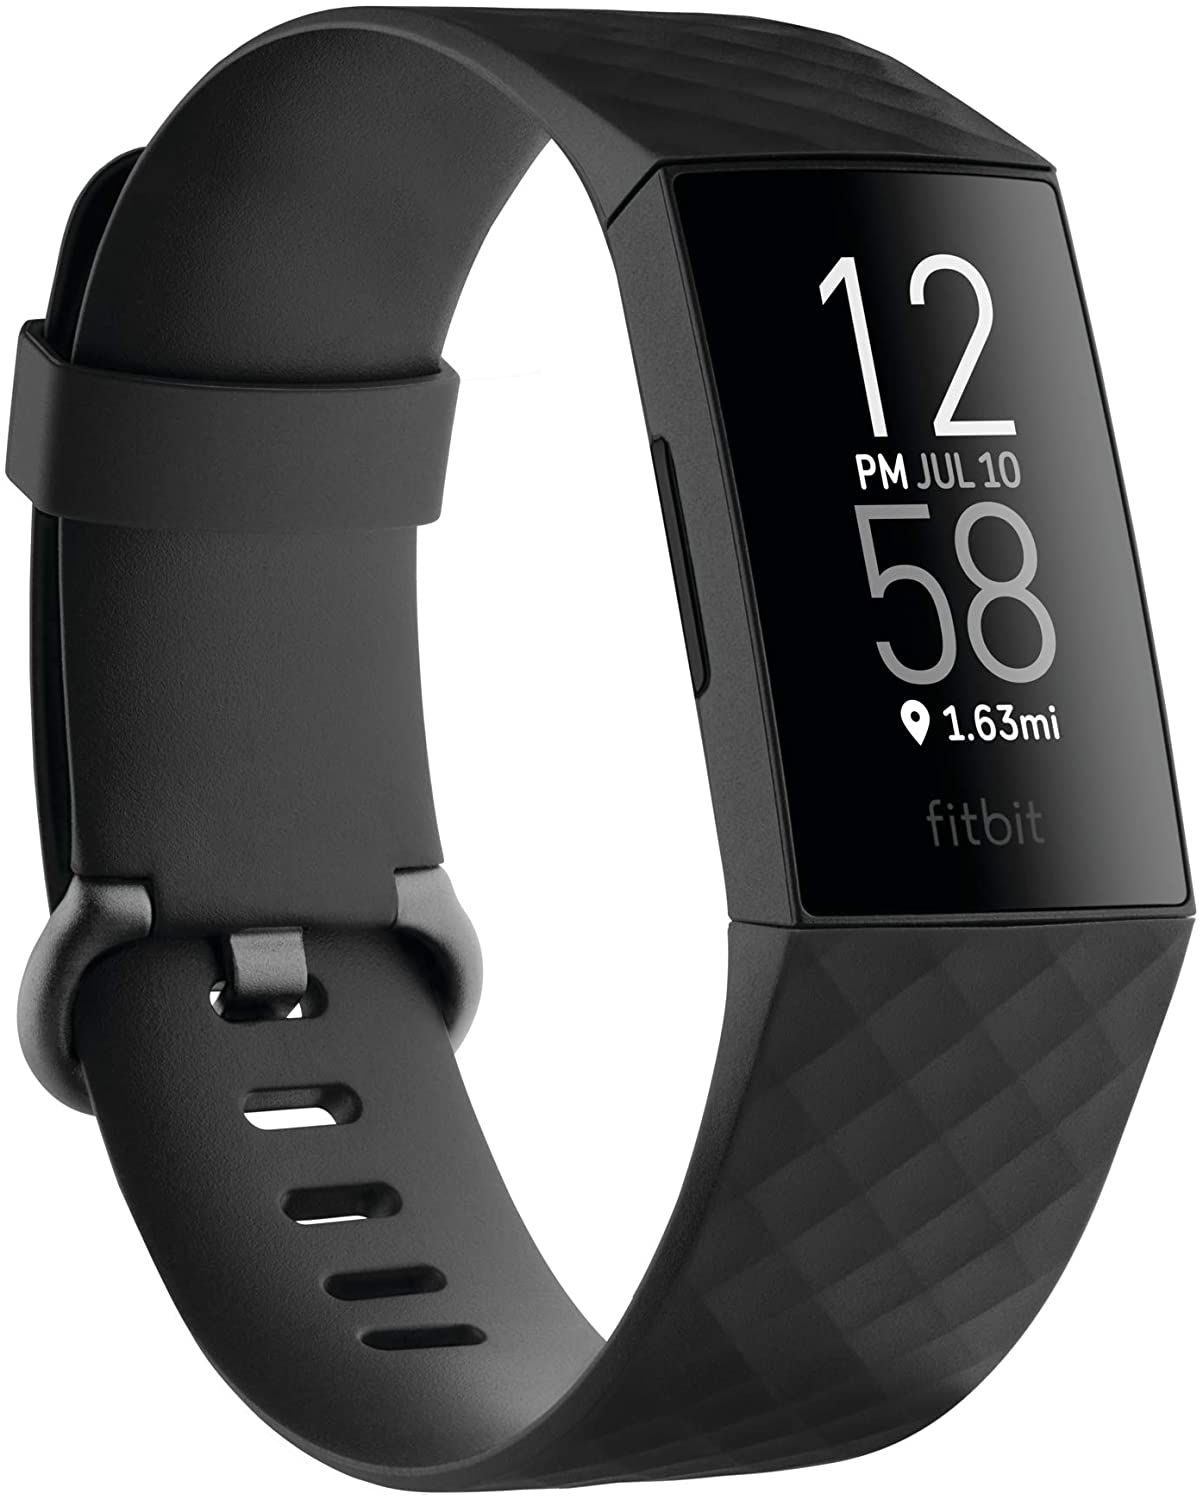 Fitbit Charge 4 main screen